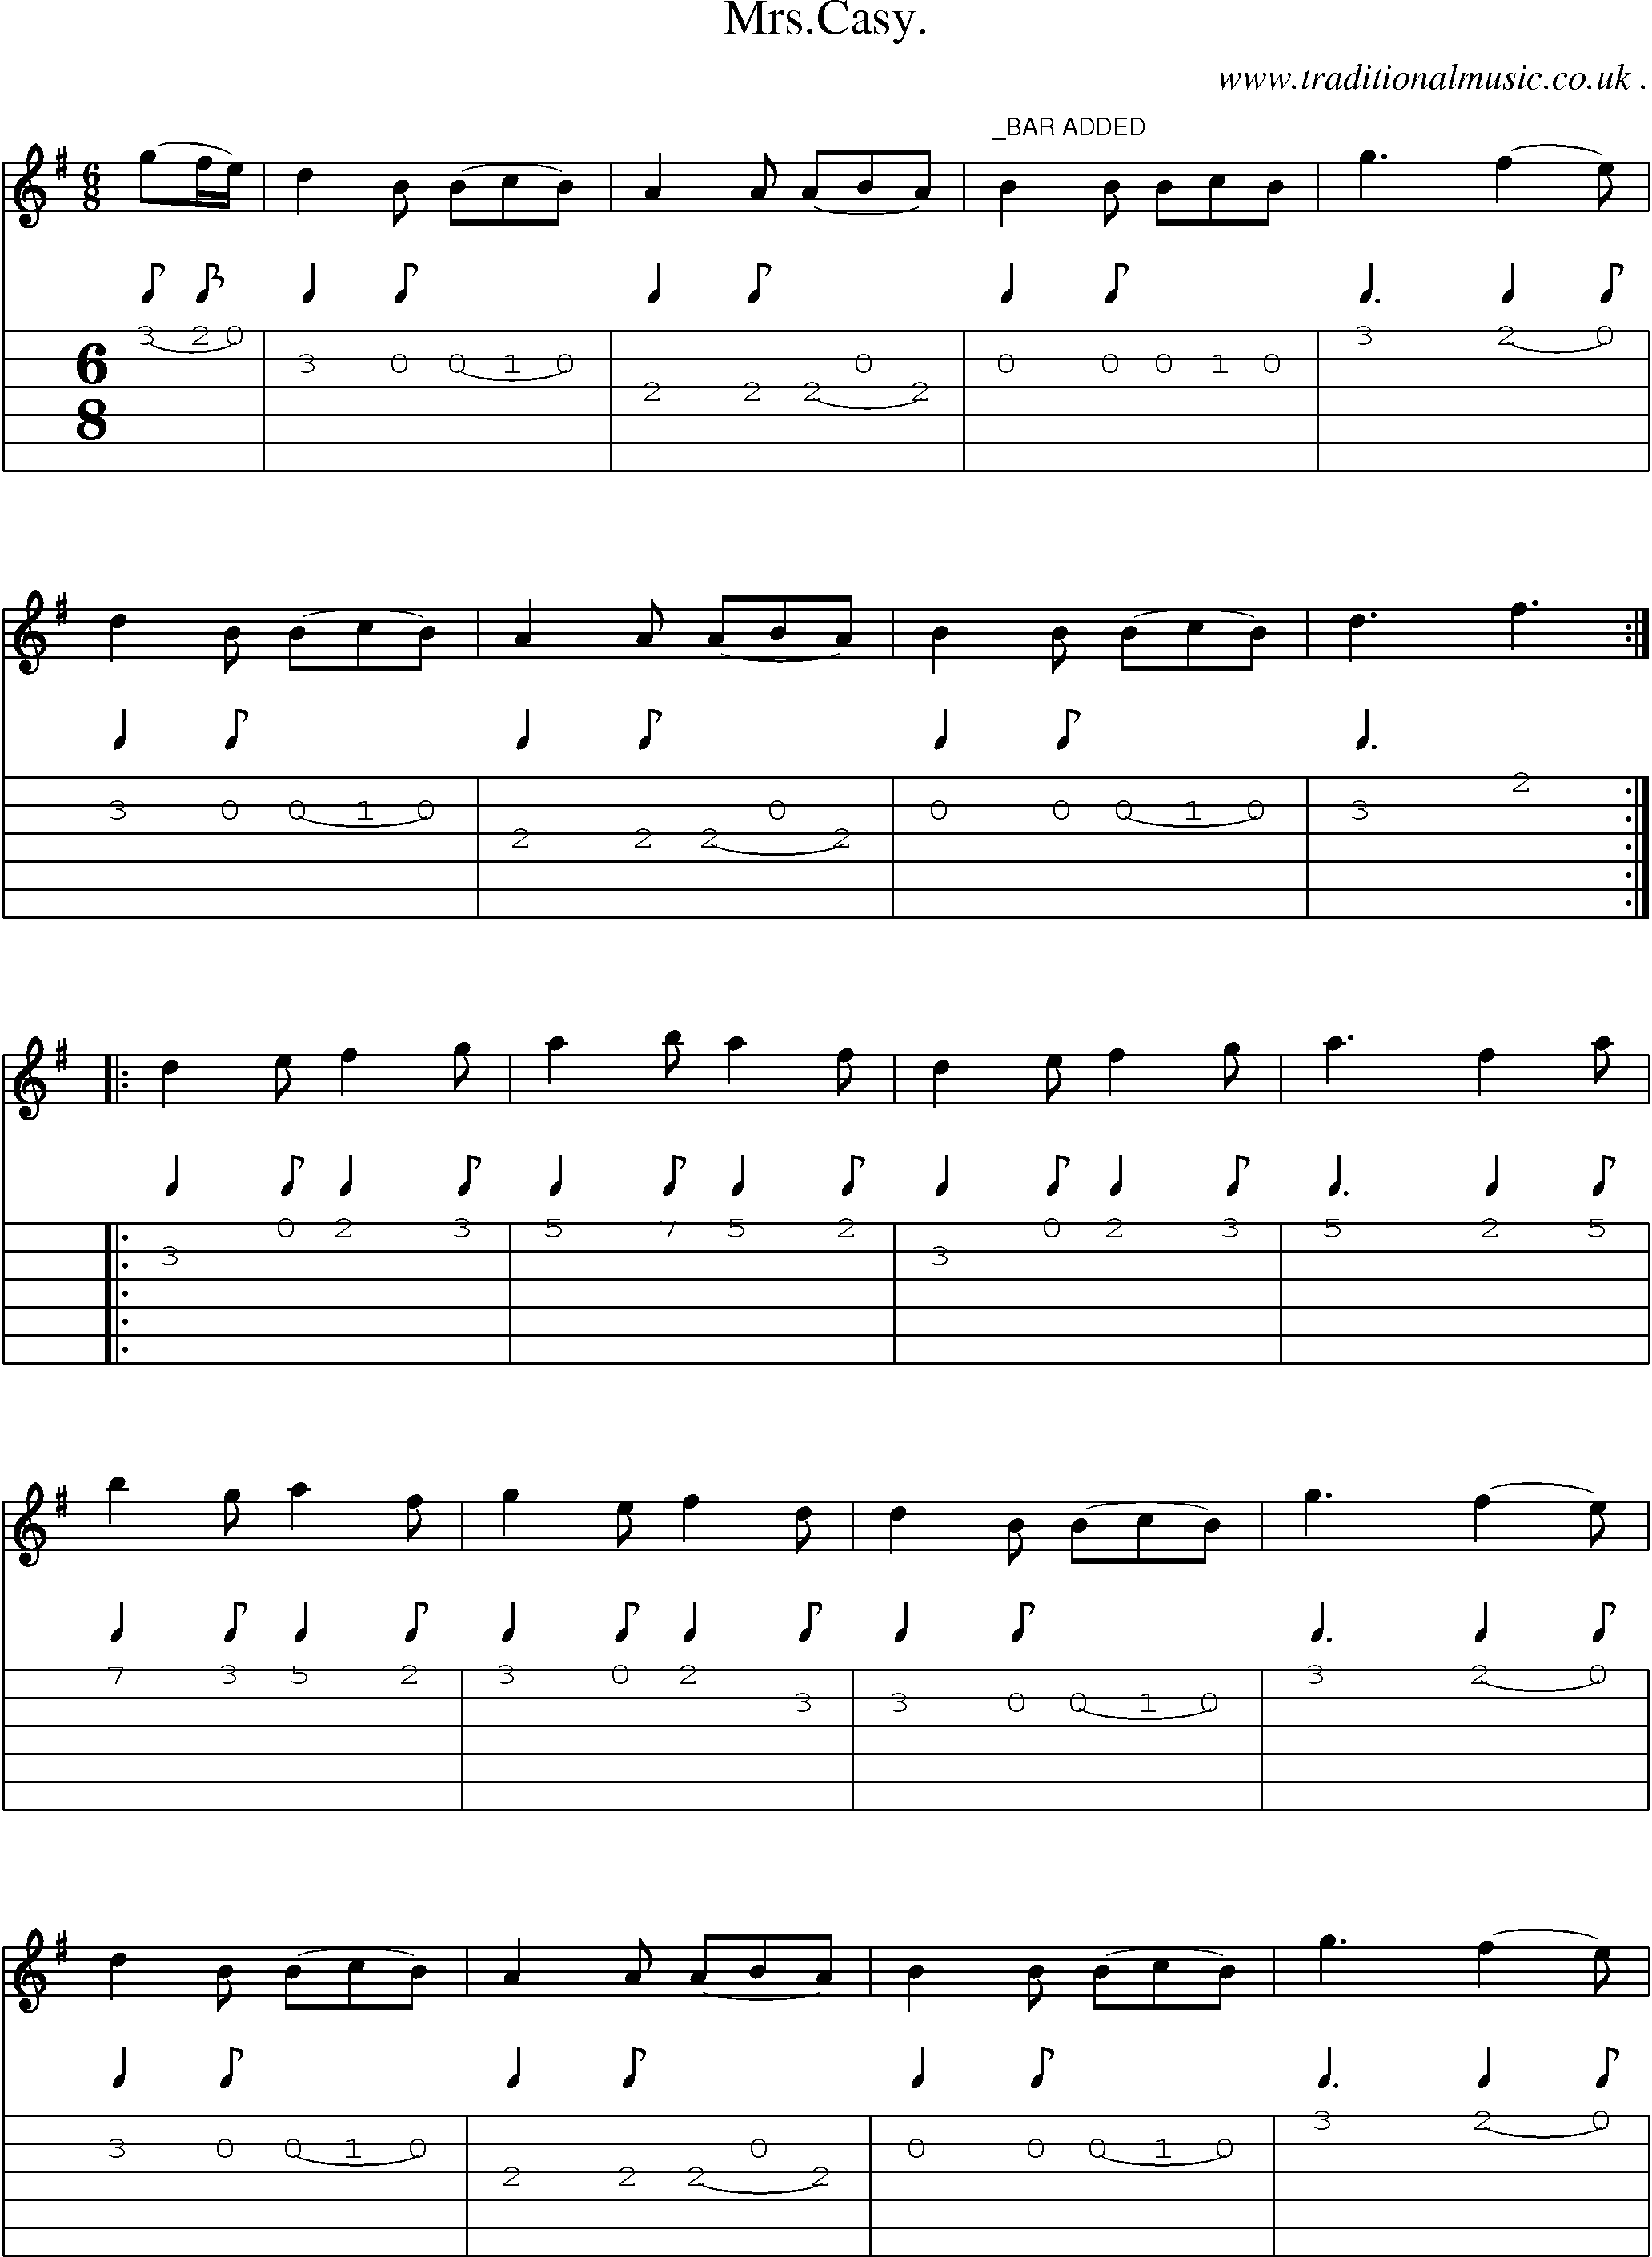 Sheet-Music and Guitar Tabs for Mrscasy